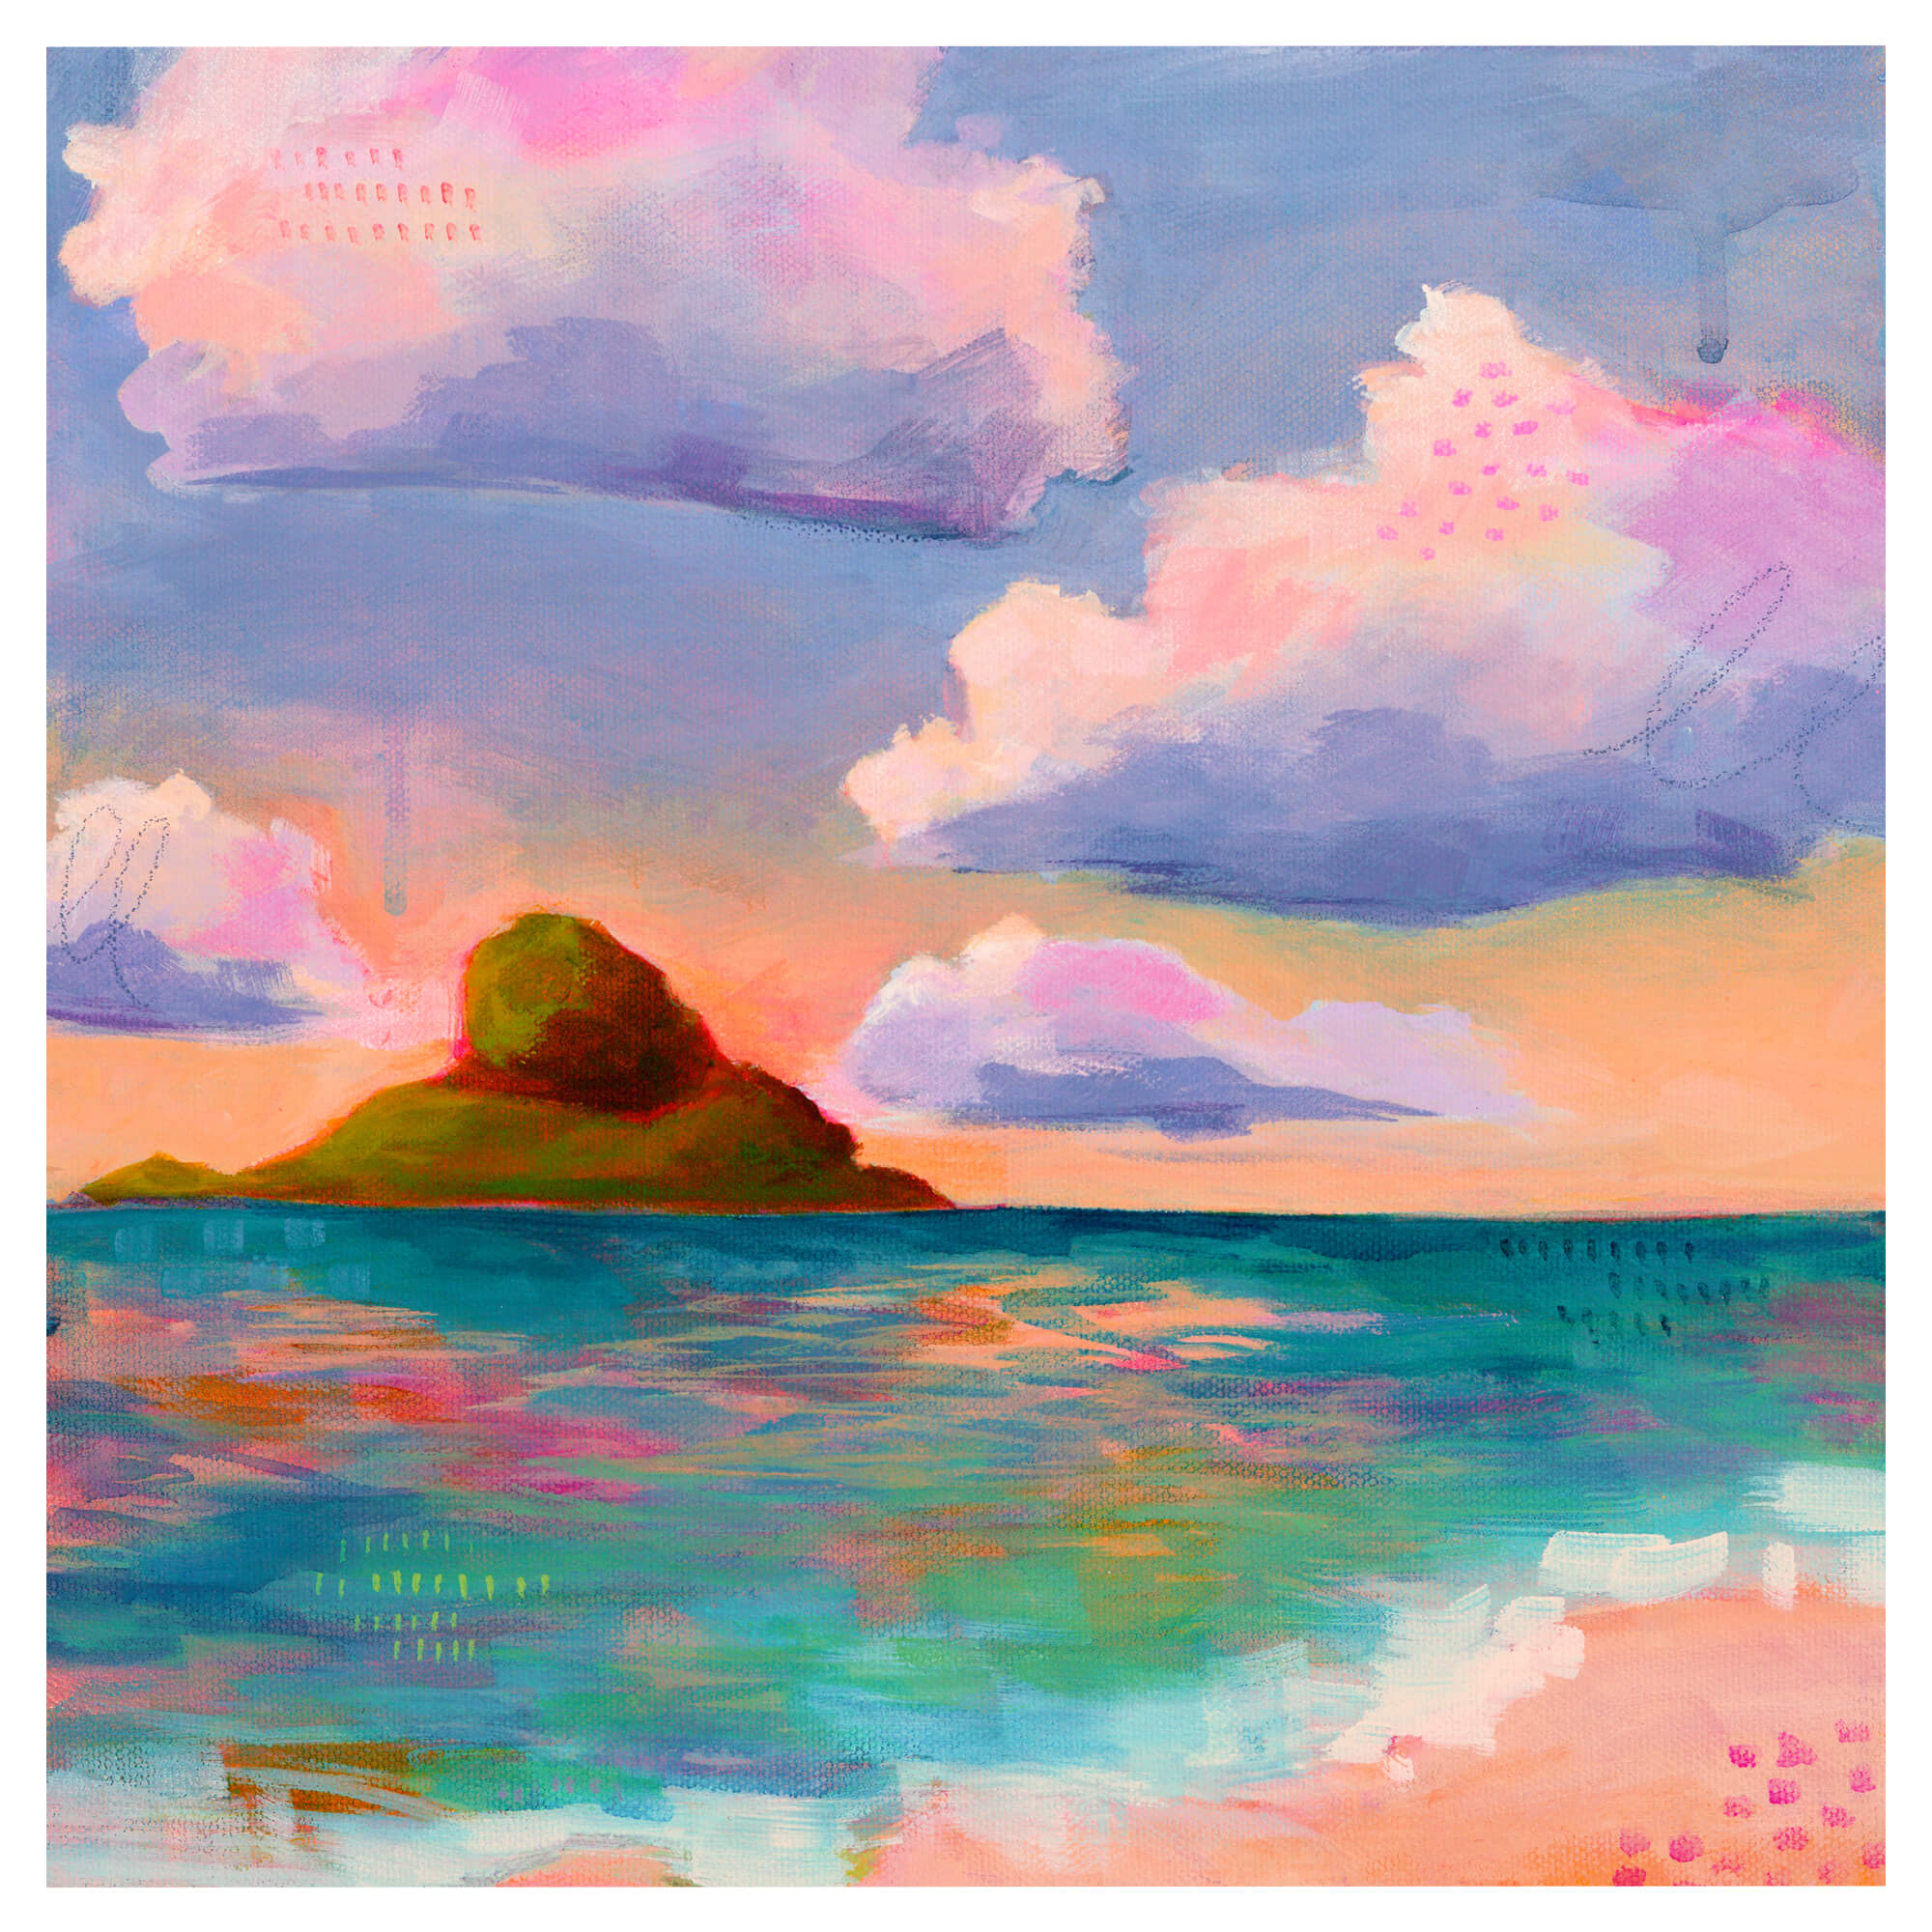  A colorful seascape with a distant tropical island by Hawaii artist Lindsay Wilkins